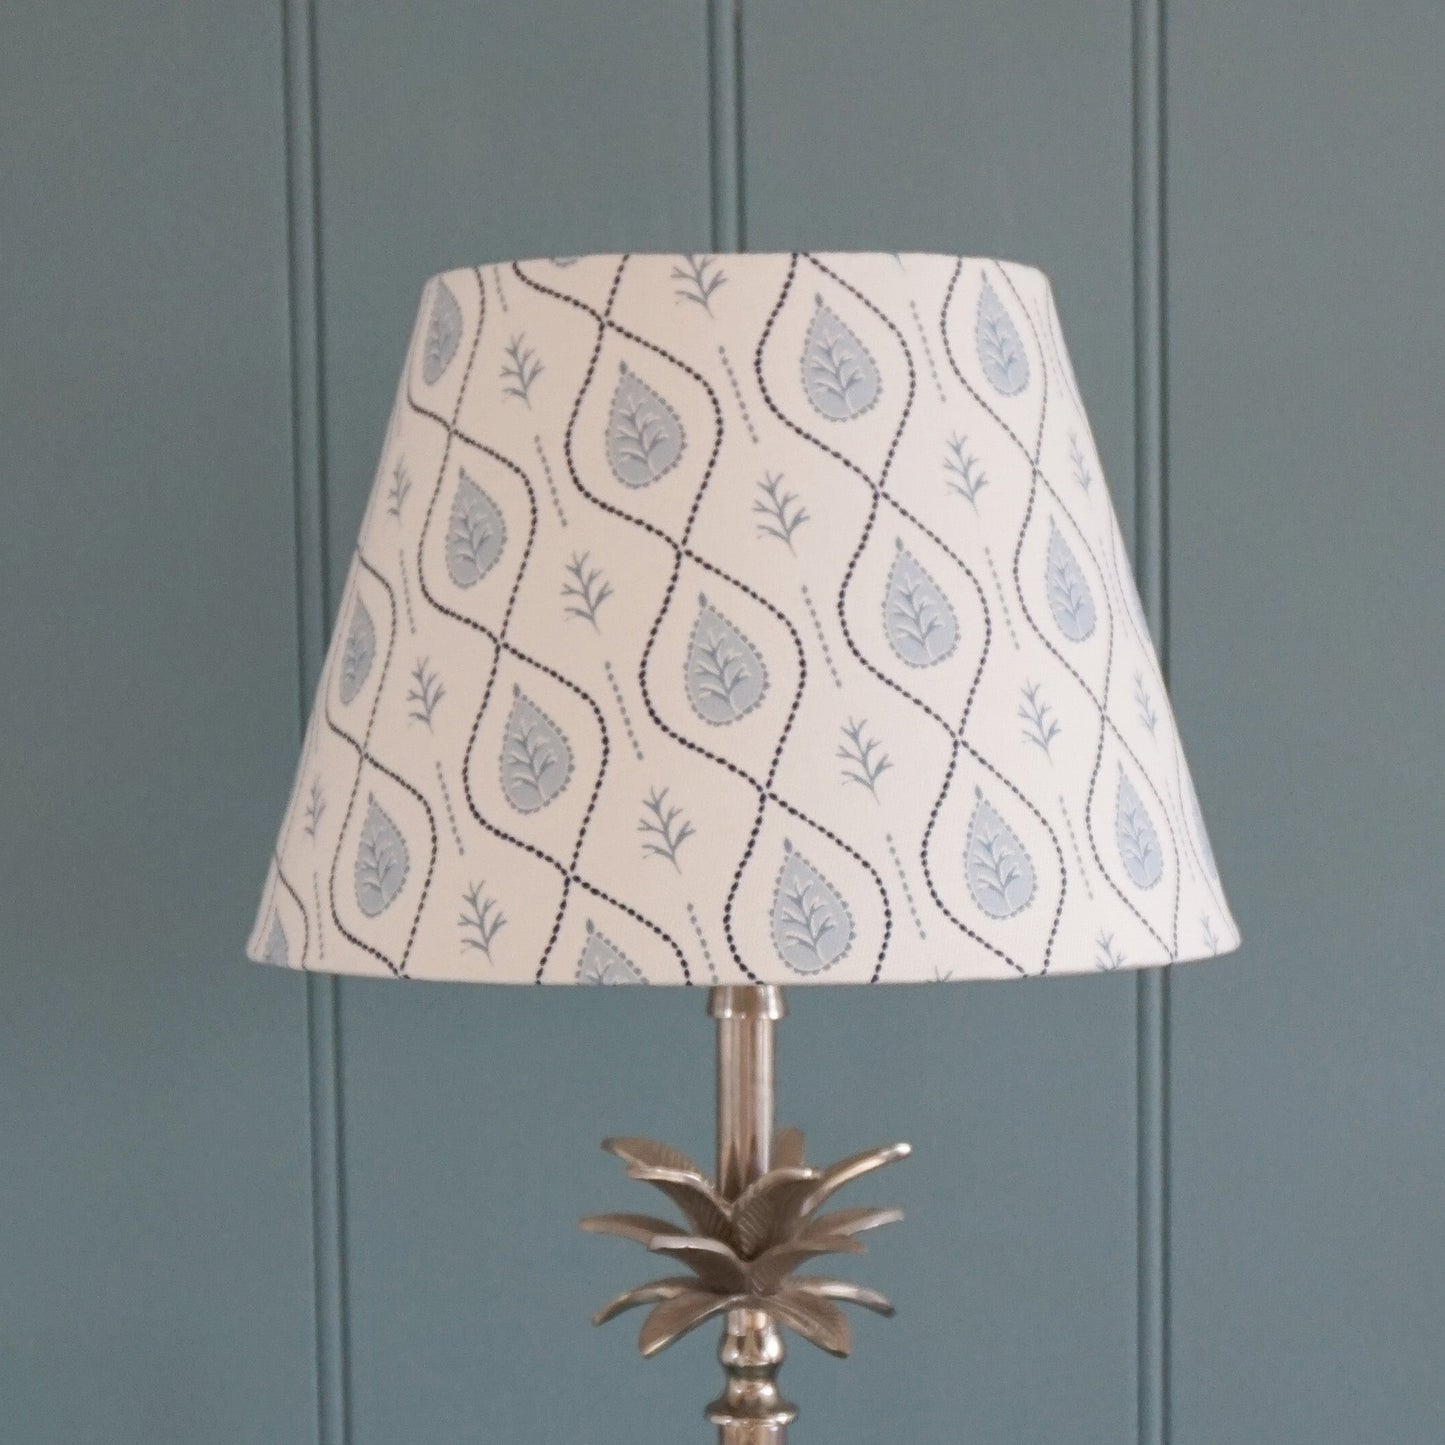 Private Group Lampshade Making Workshops